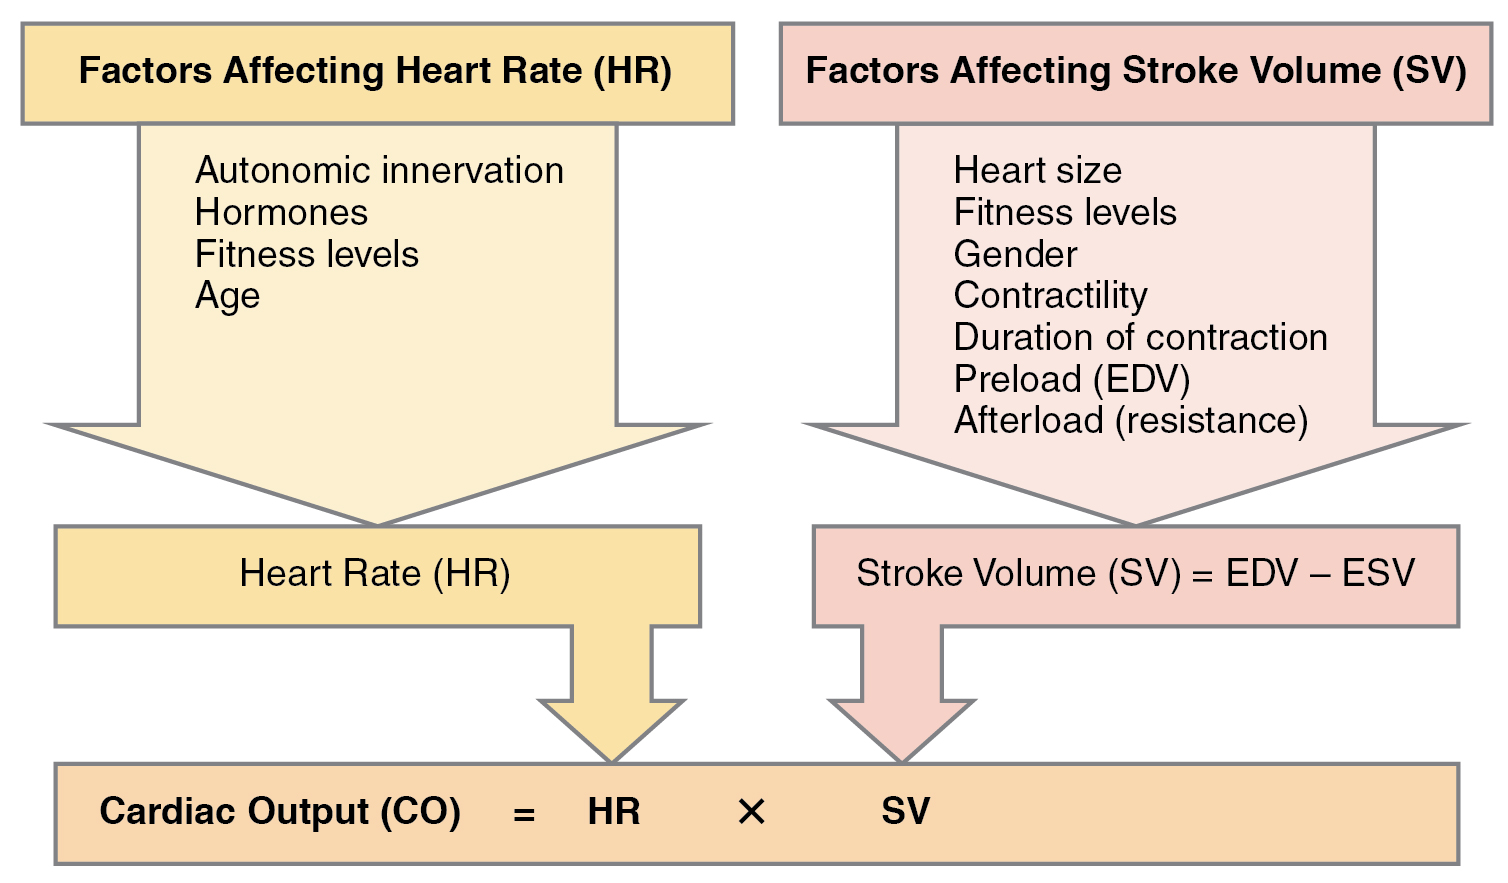 This figure lists the different factors affecting the heart rate and stroke volume. It also shows how they both affect the cardiac output.